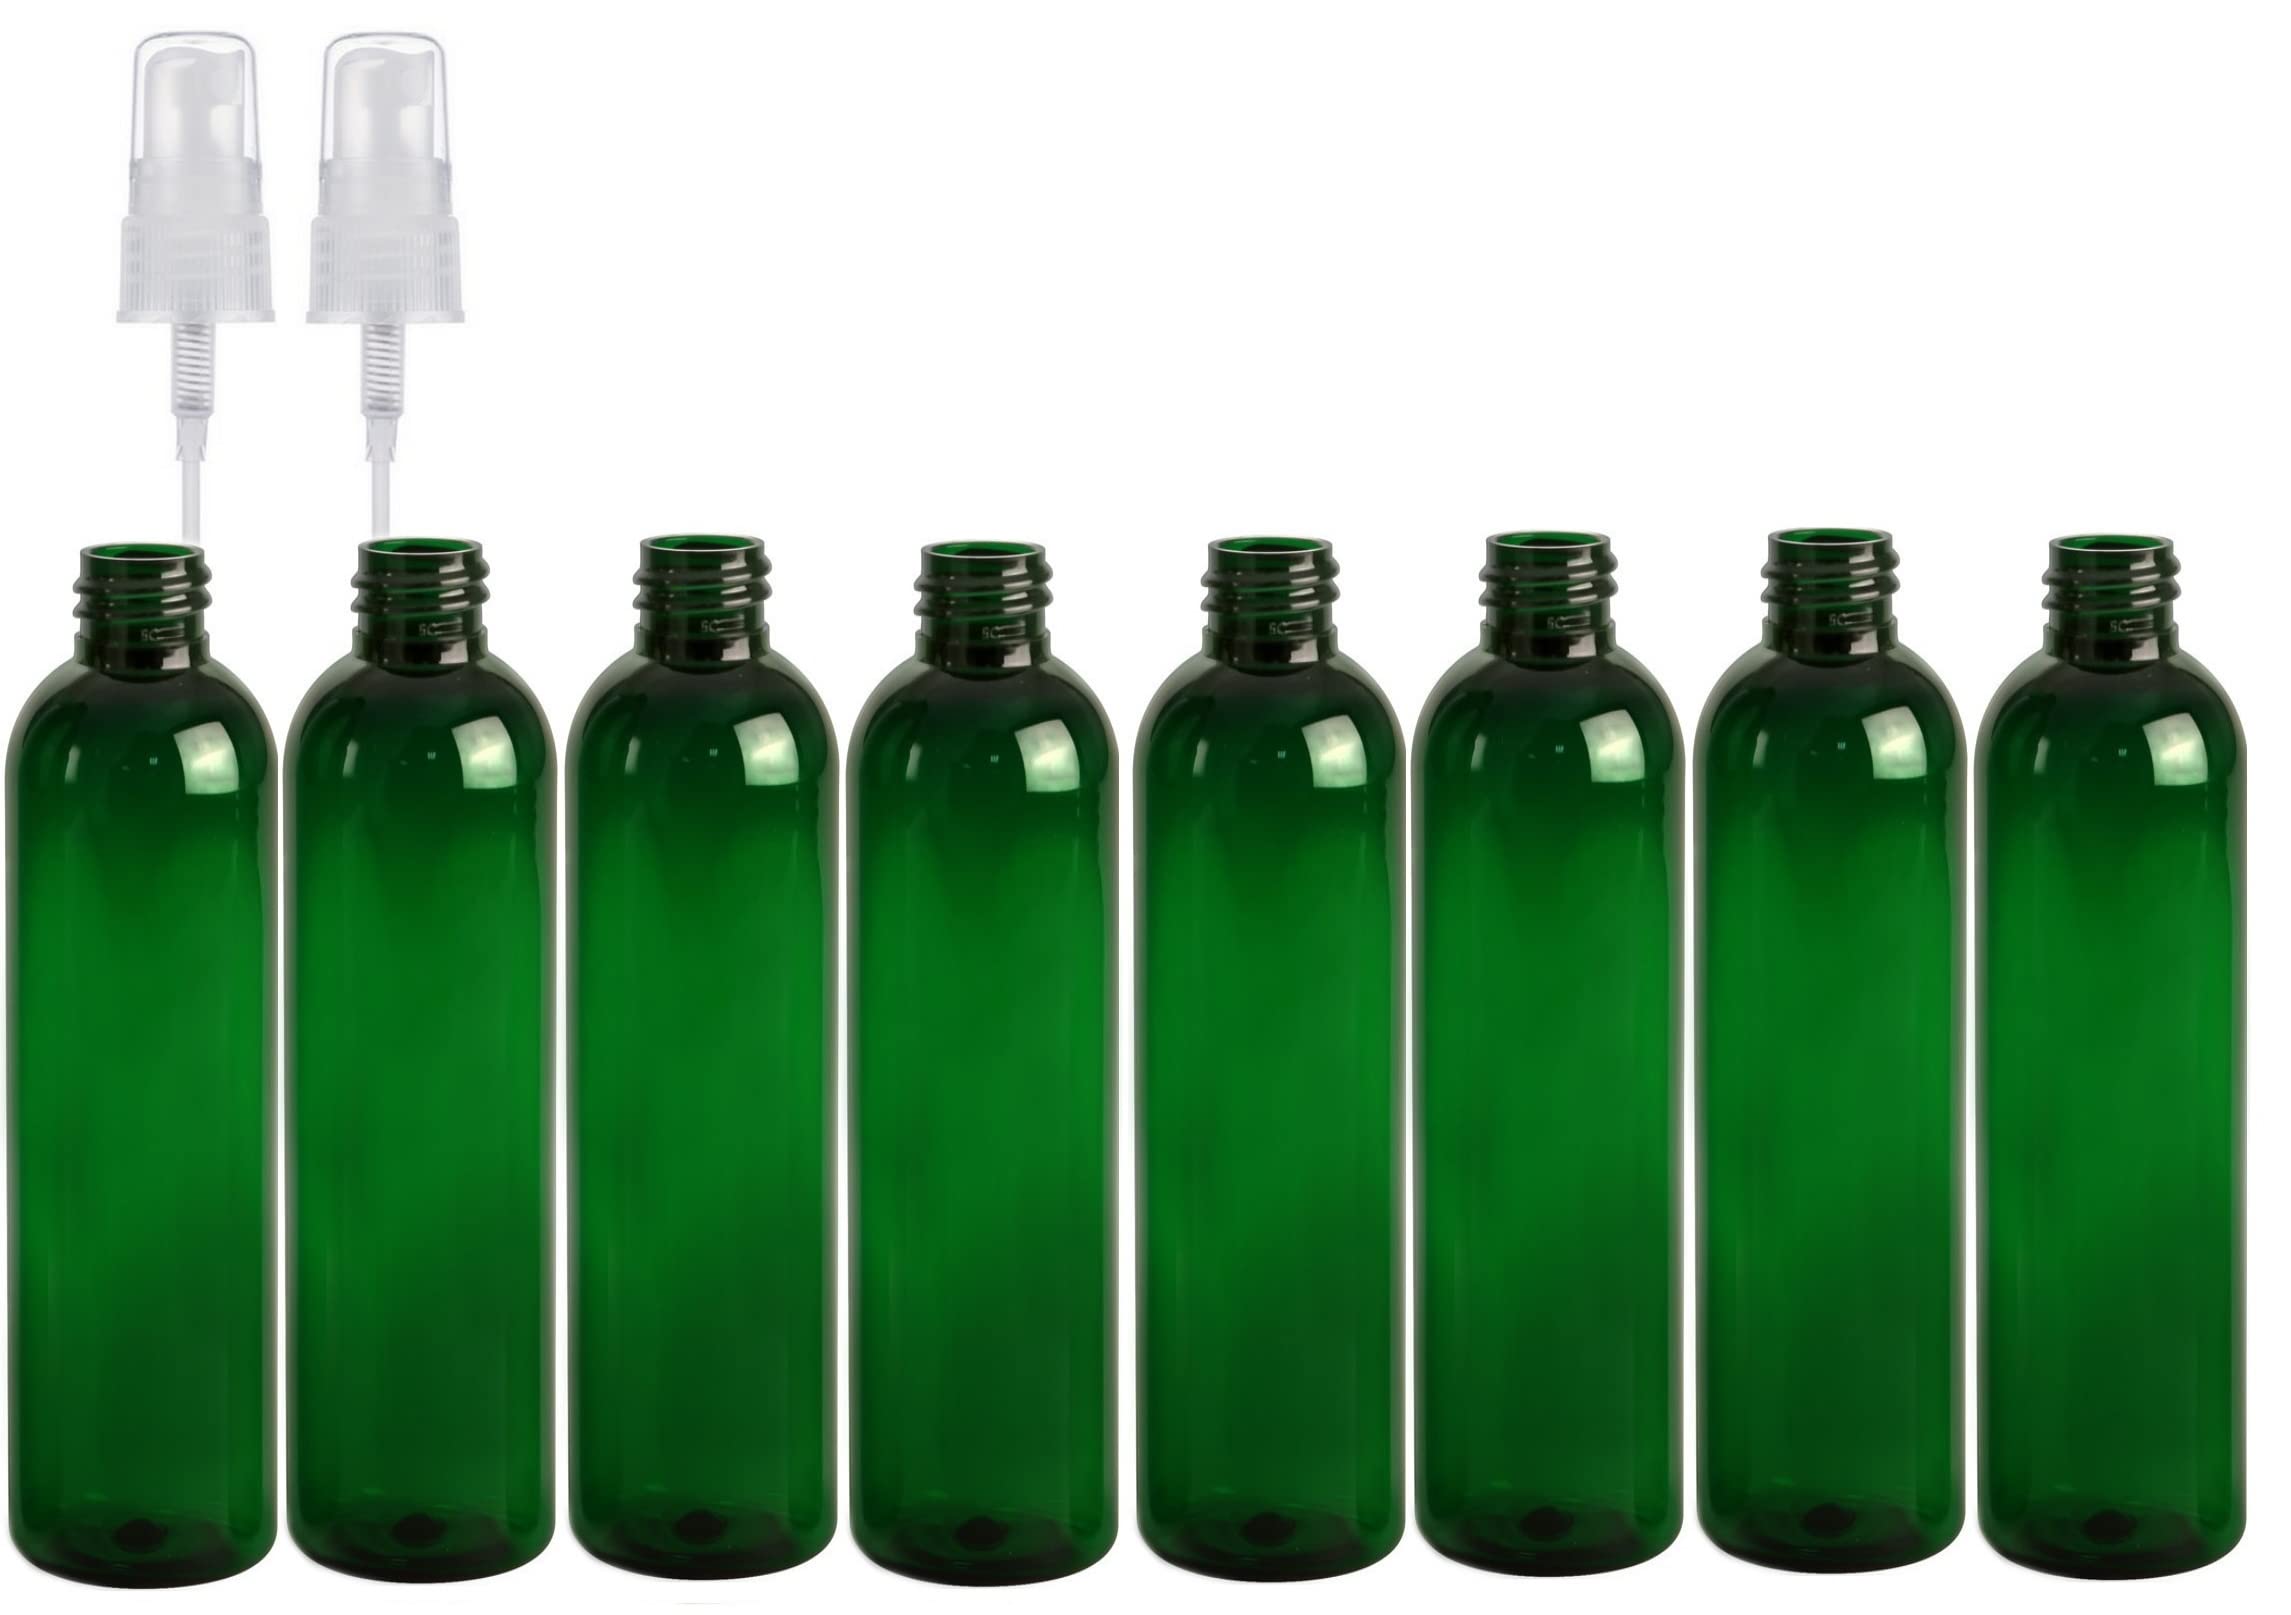 Premium Essential Oi 8 Ounce cosmo Round Bottles, PET Plastic Empty Refillable BPA-Free, with Natural color Fine Mist Spray caps (Pack of 8) (green)